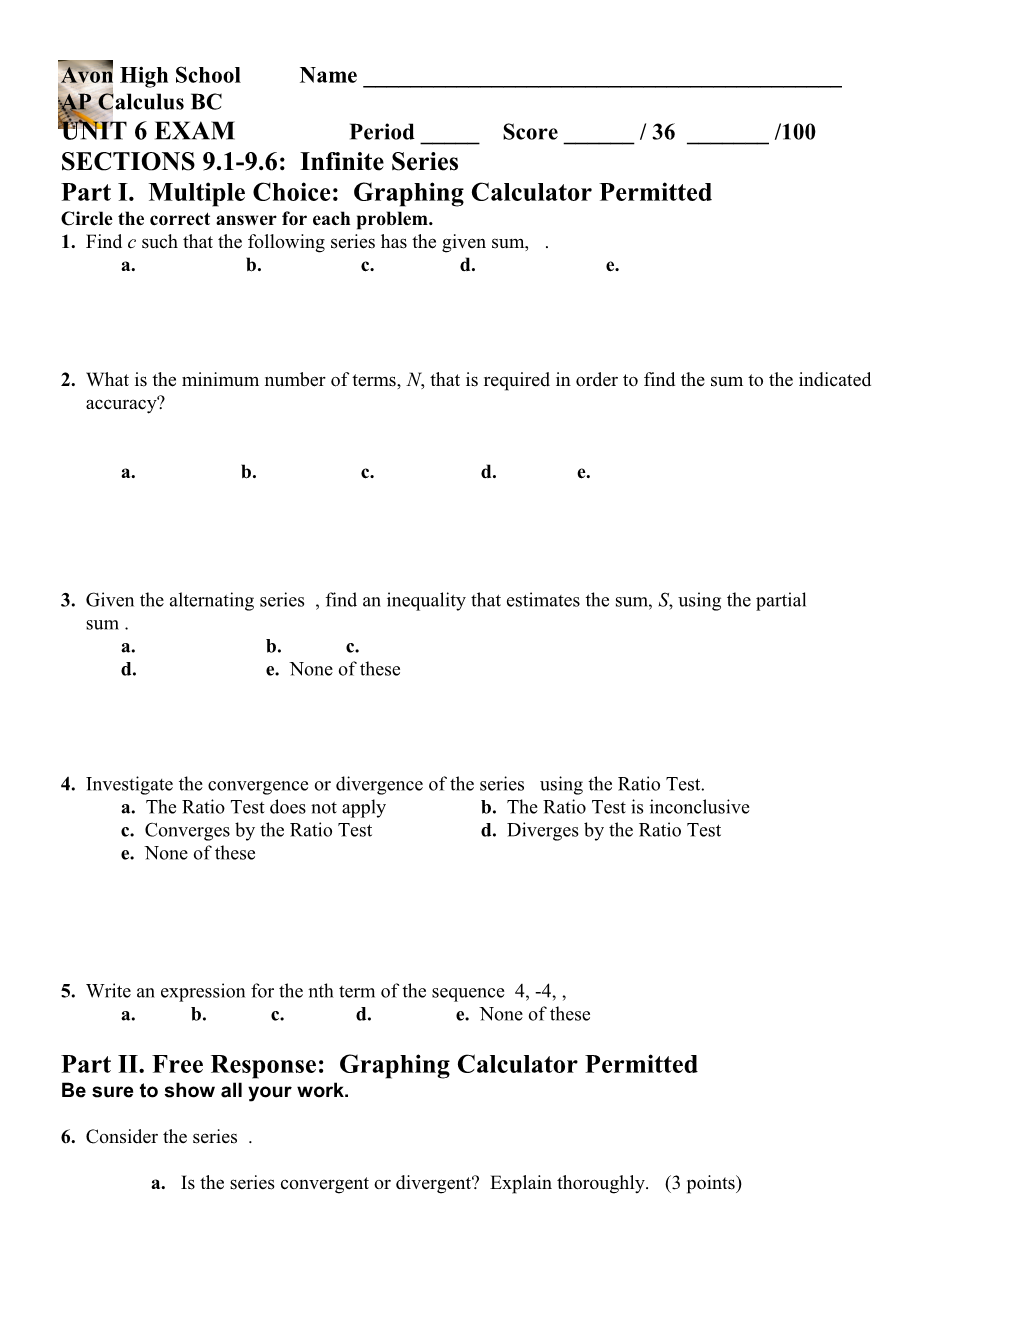 Part I. Multiple Choice: Graphing Calculator Permitted